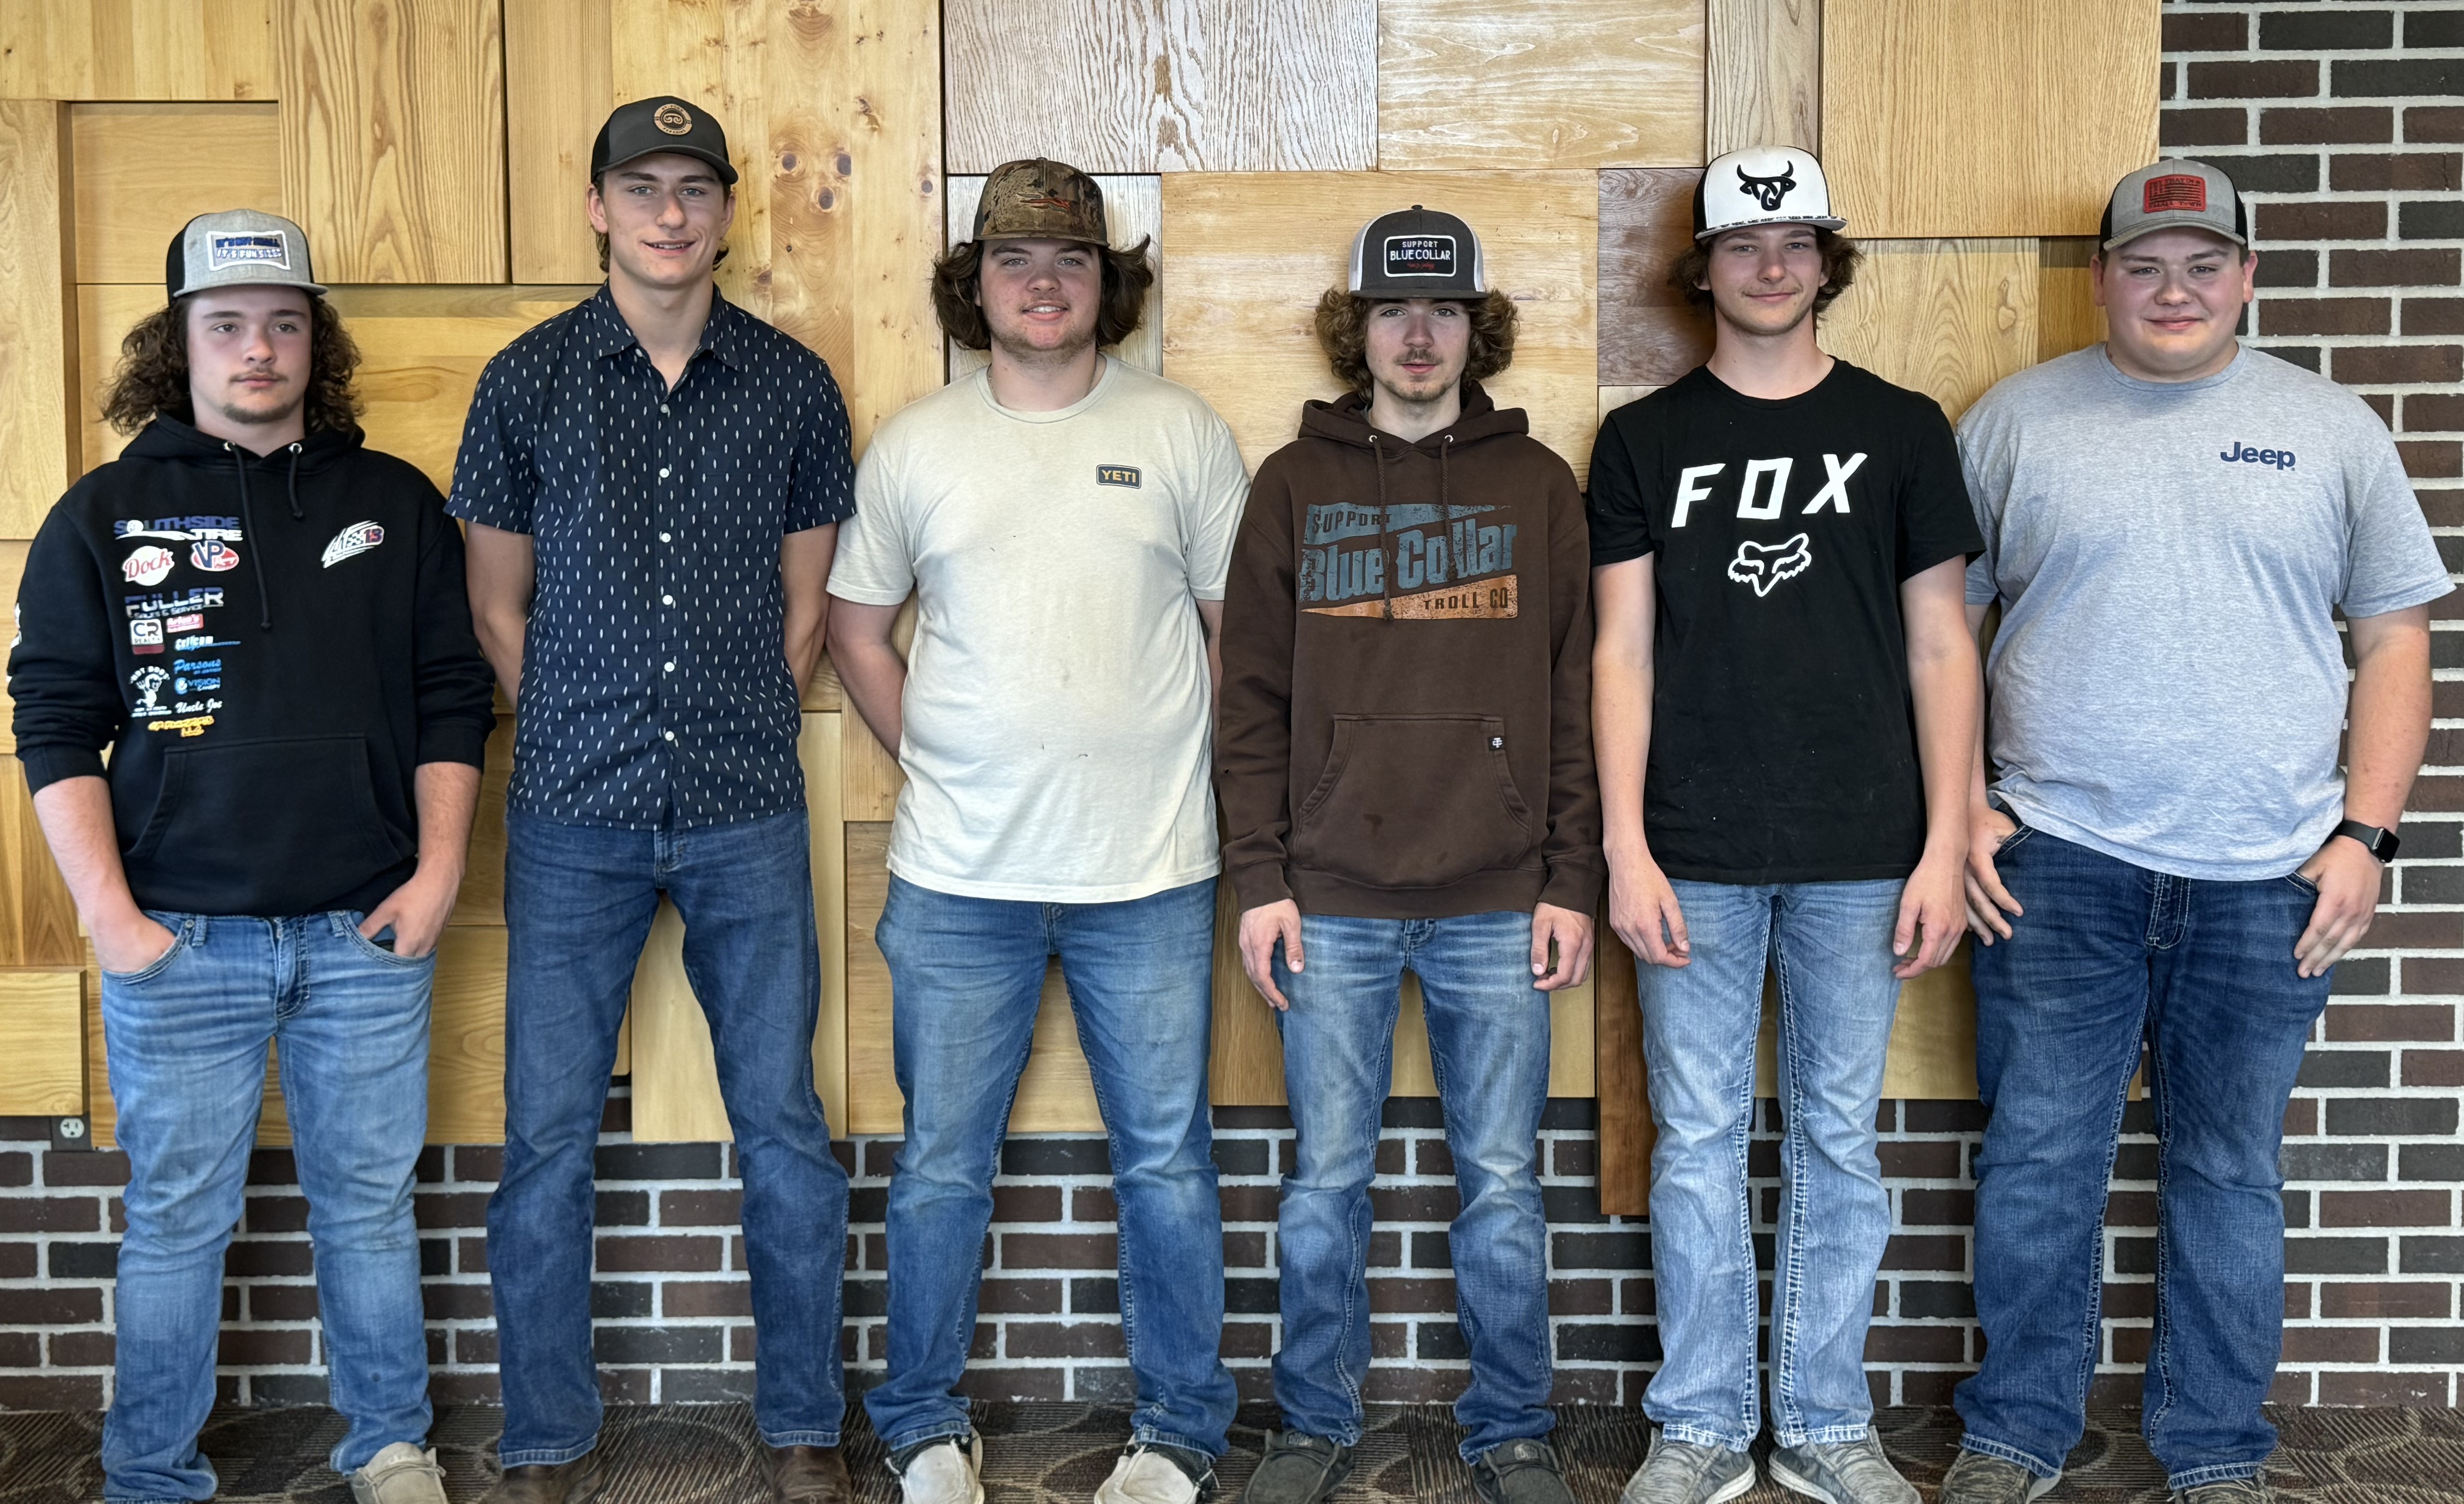 Antigo Basic Welding Academy Students posing while standing against a wall